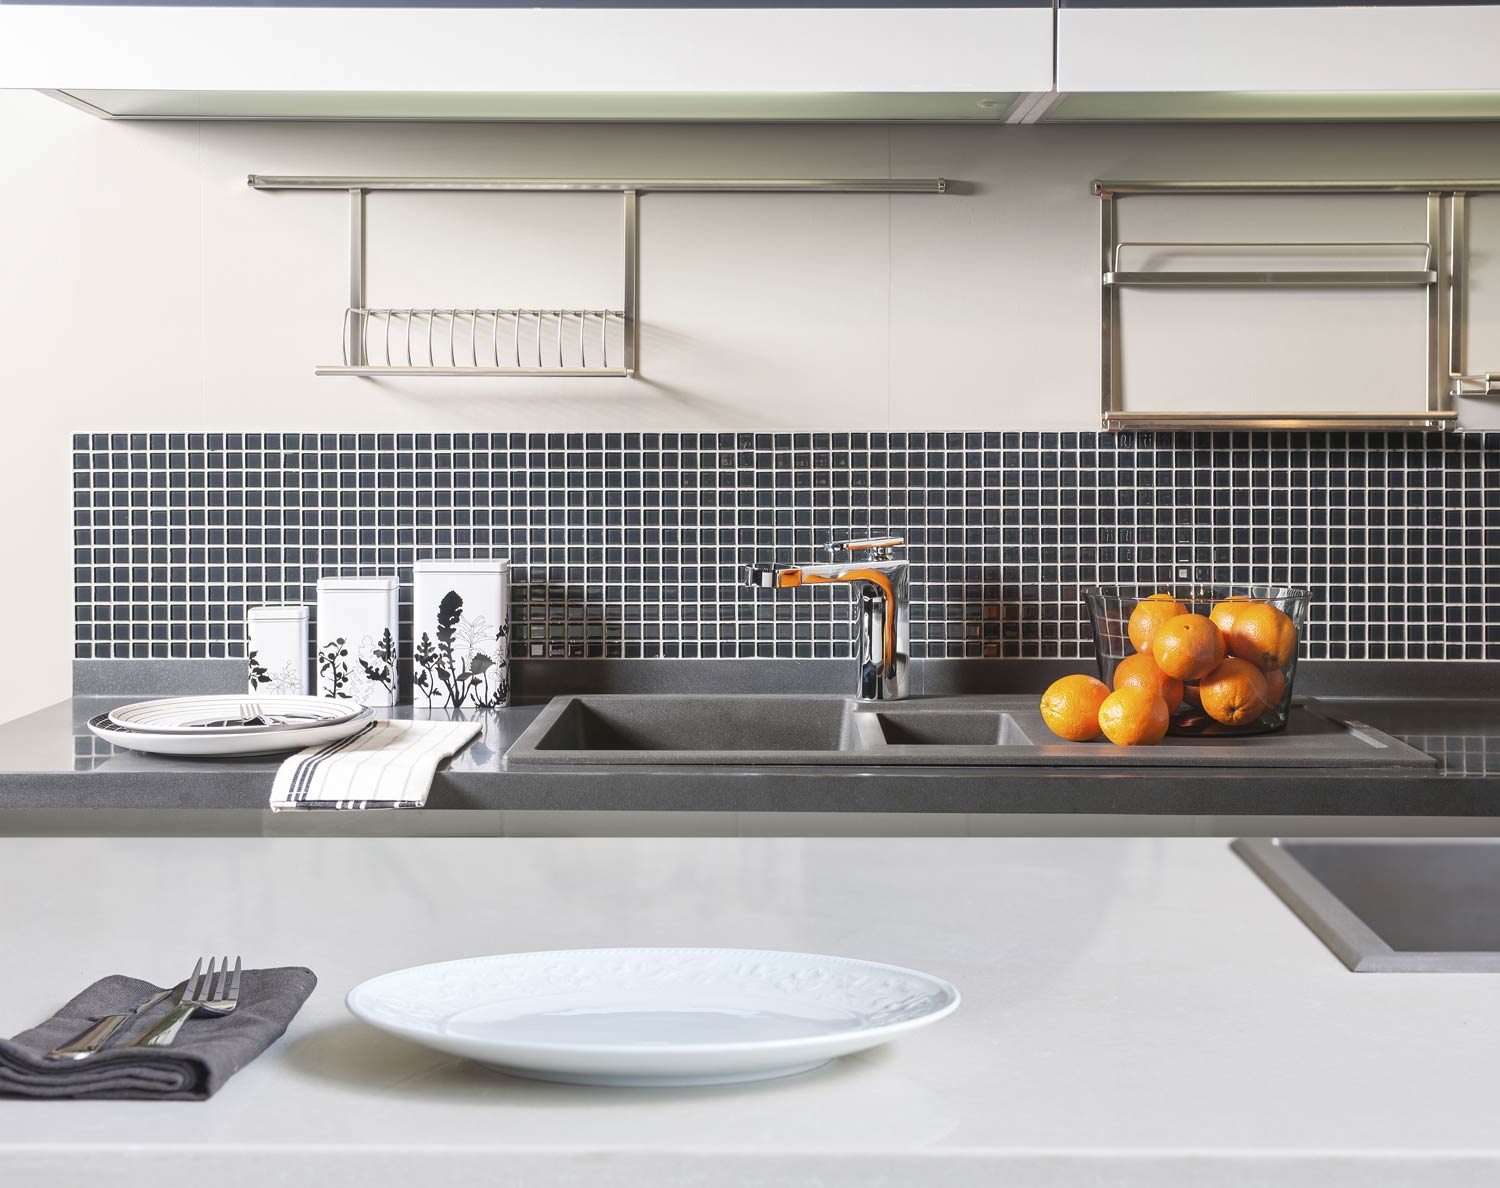 Modern Kitchen Backsplash Ideas for Cooking With Style